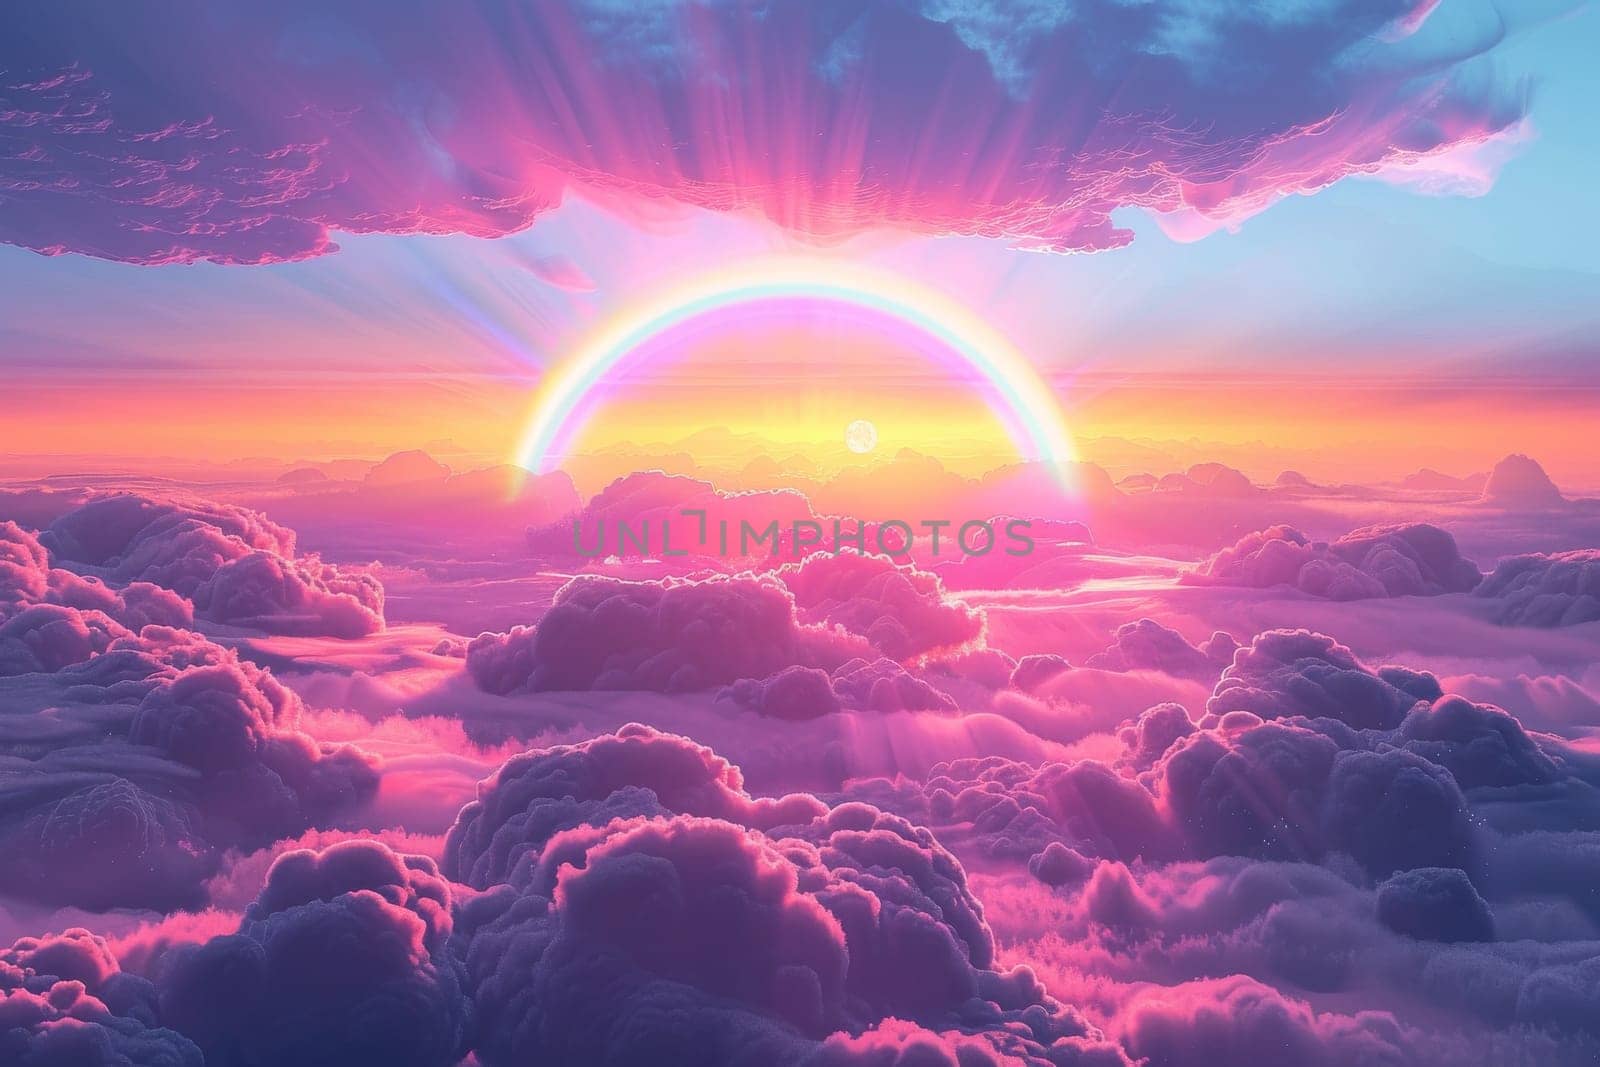 A rainbow is seen in the sky above a cloudy sky. The sky is a mix of pink and purple colors, creating a dreamy and peaceful atmosphere